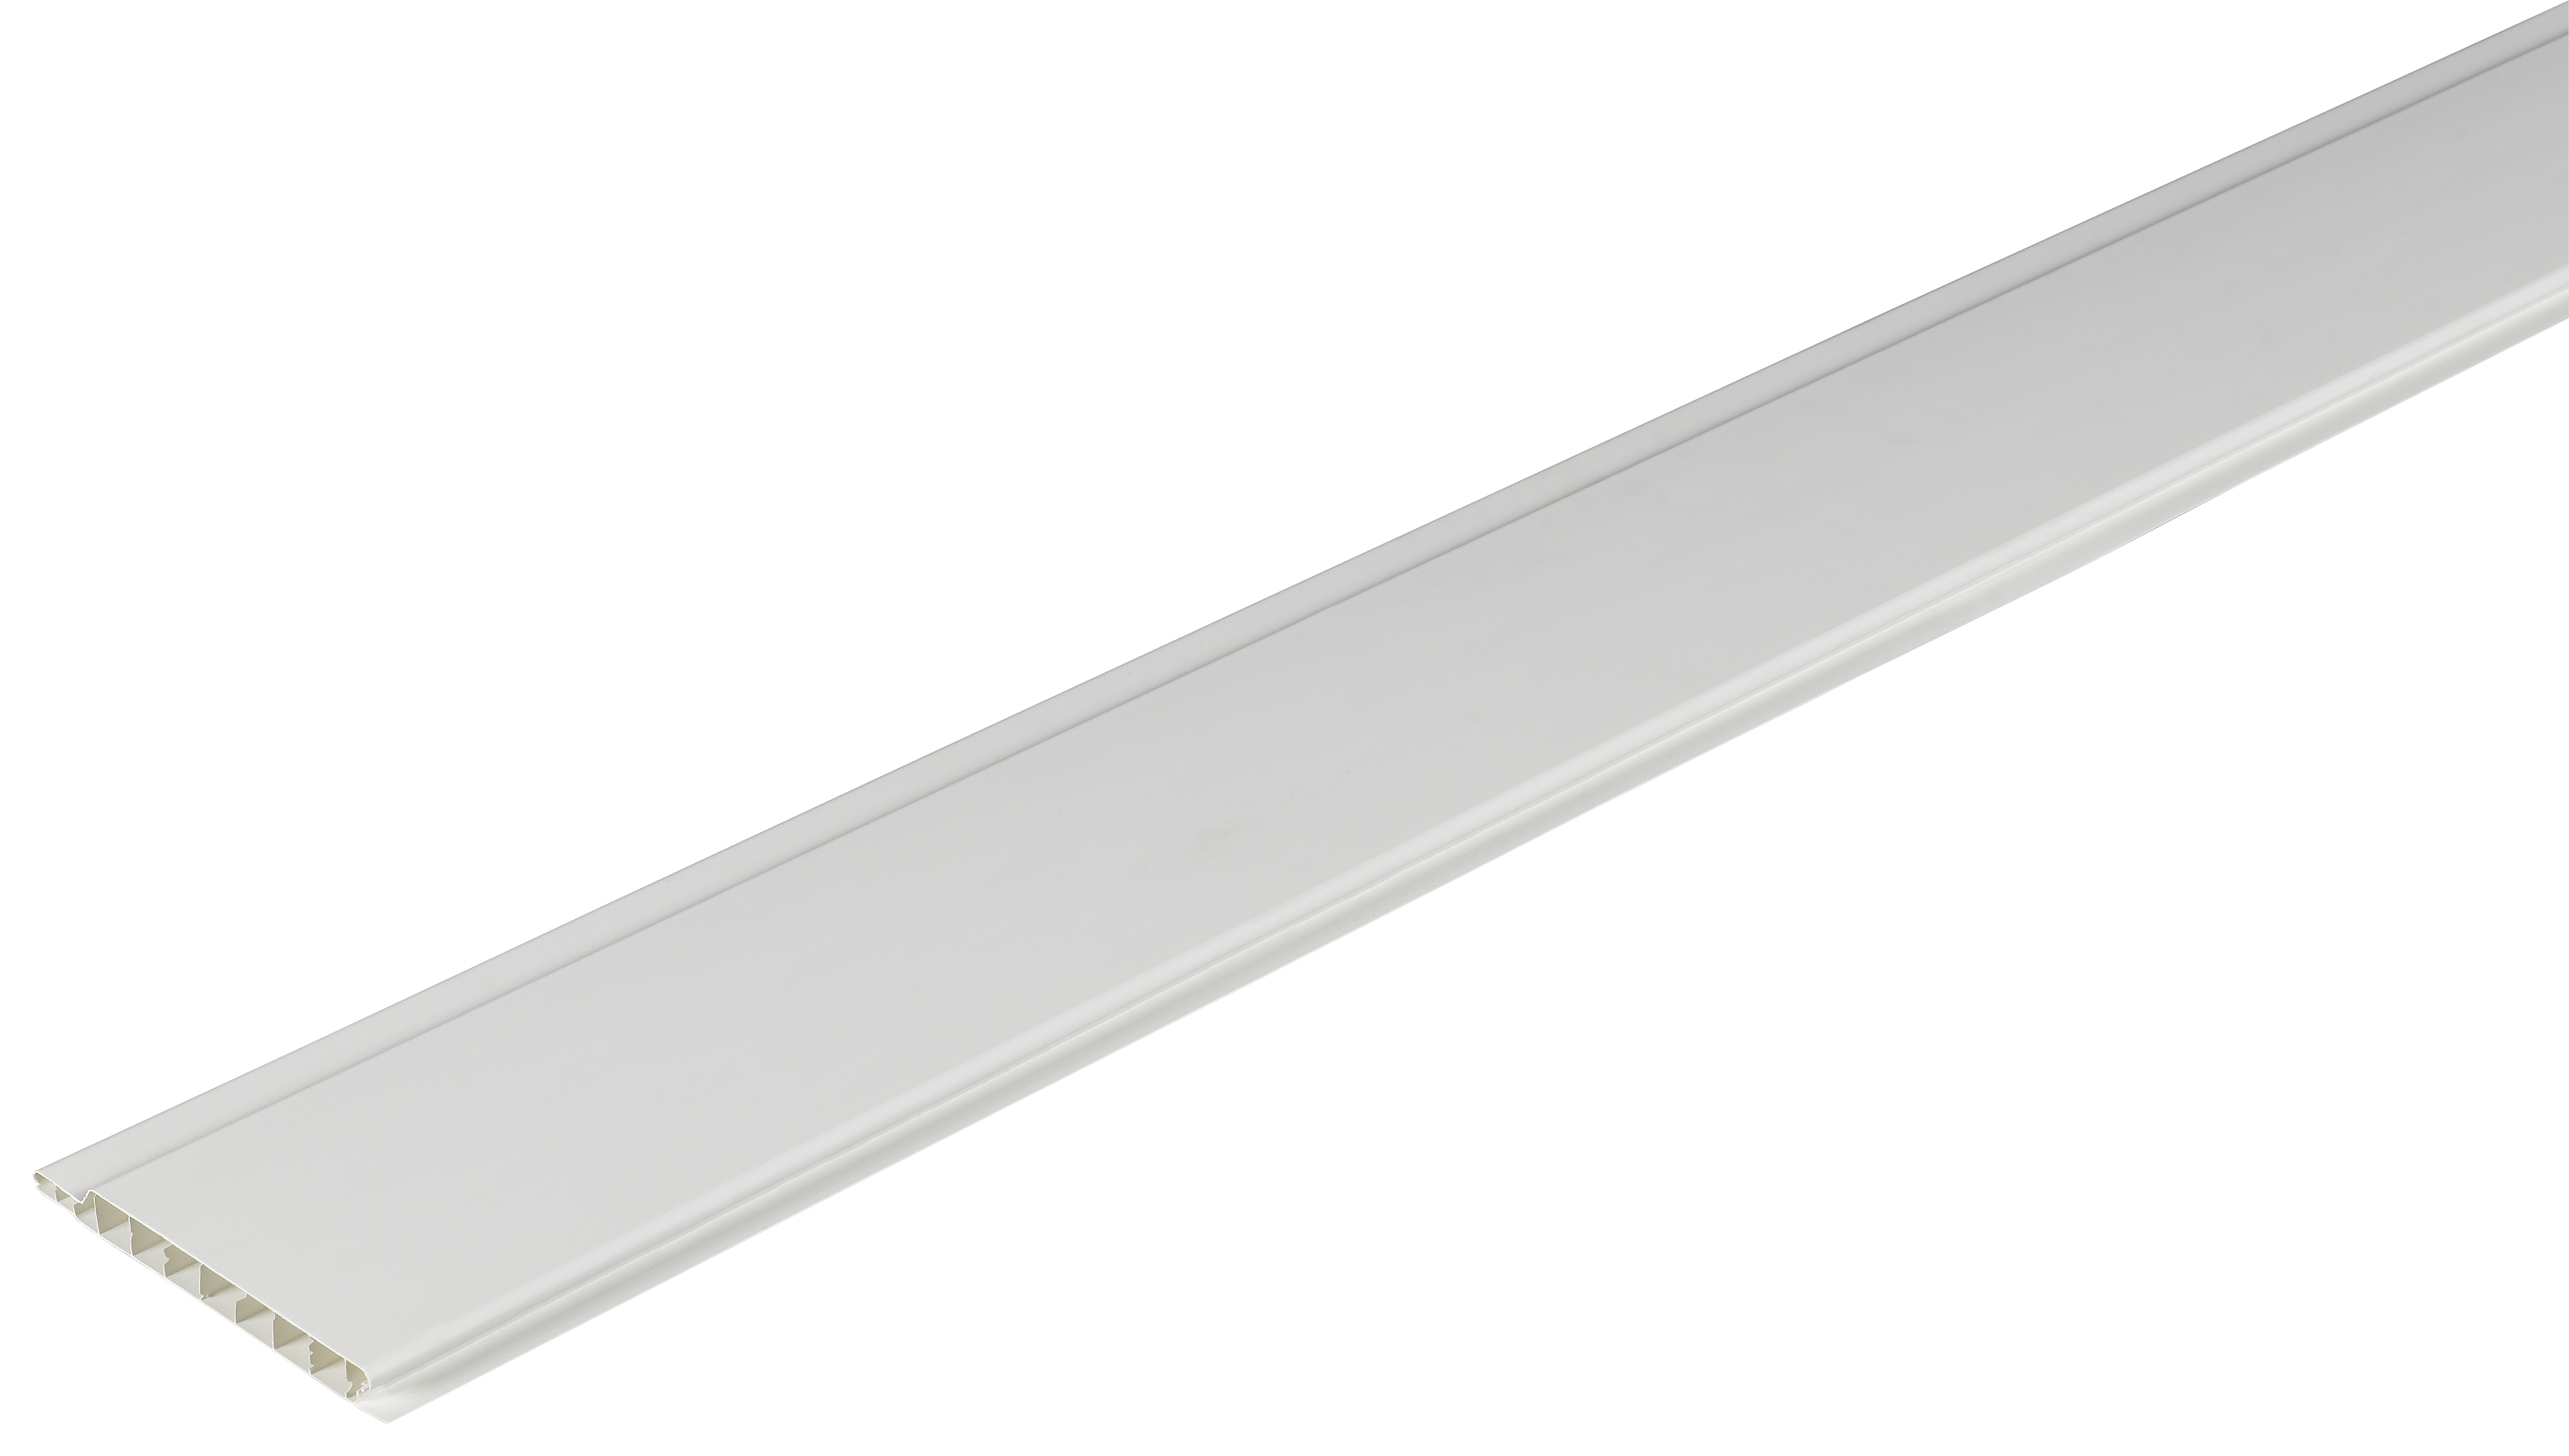 Image of Wickes PVCu Interior Cladding - White 100mm x 2.5m Pack of 5